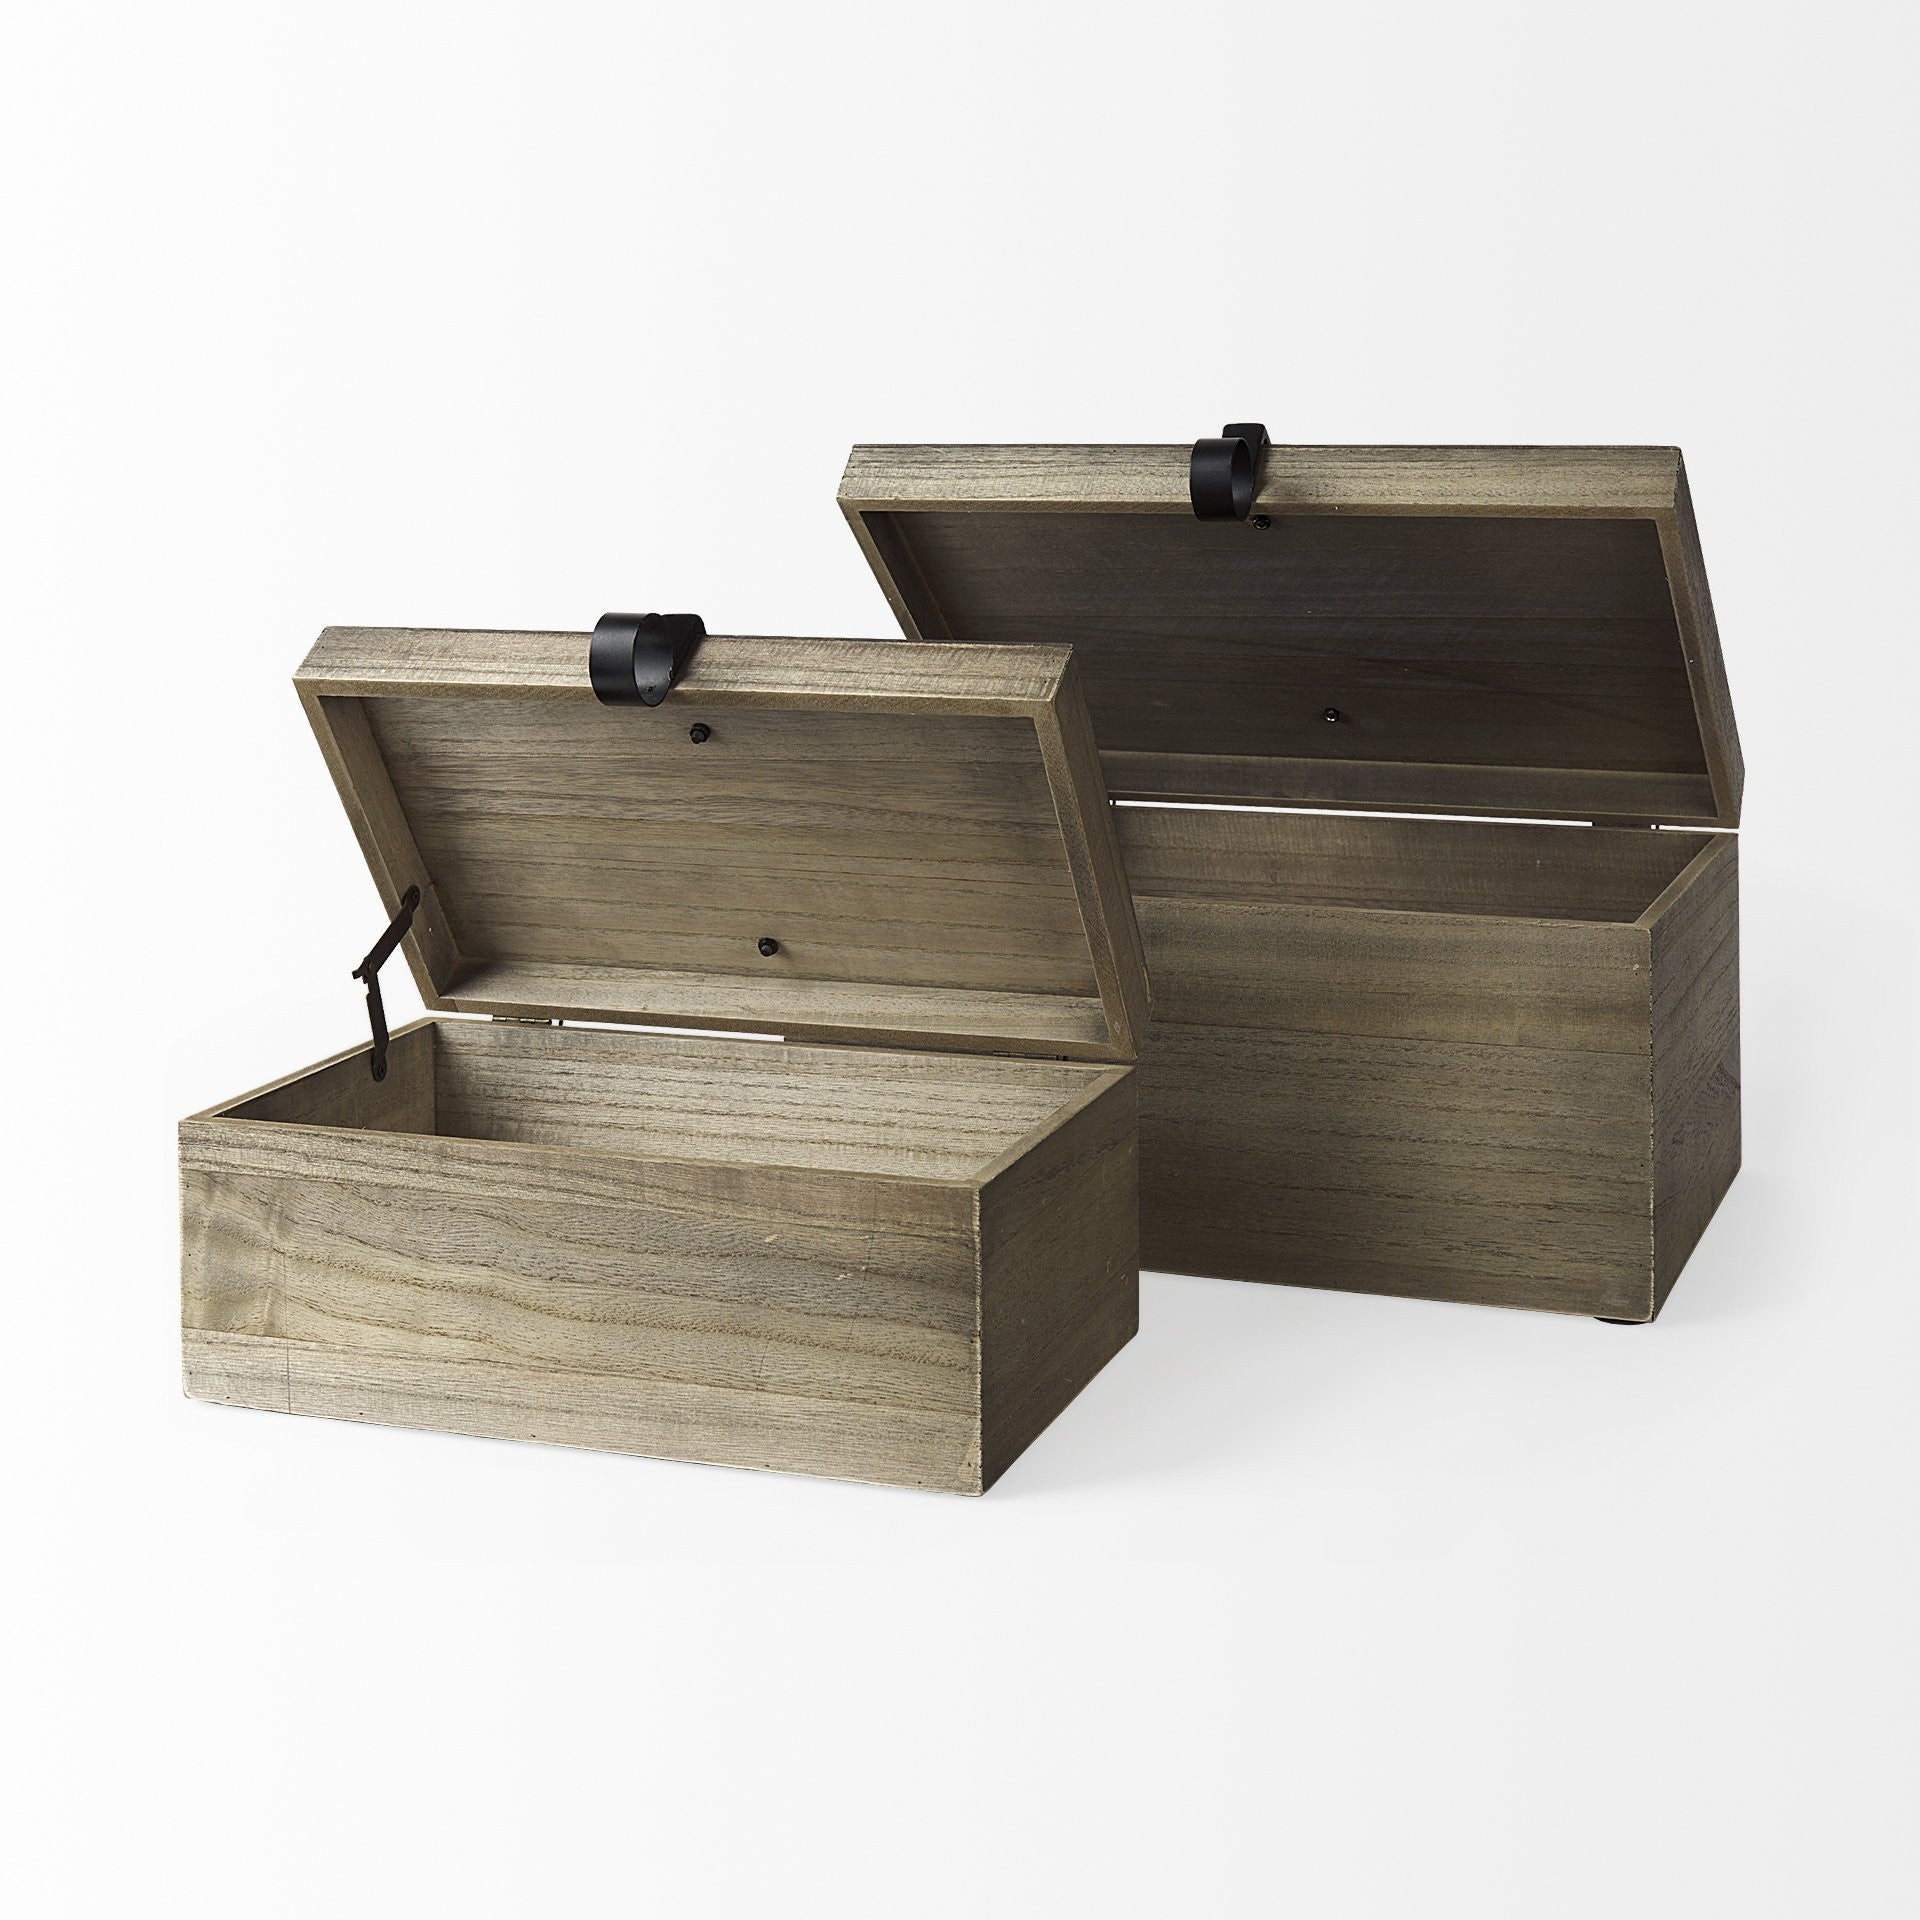 Set Of Two Brown Wooden Boxes With Metal Detailing